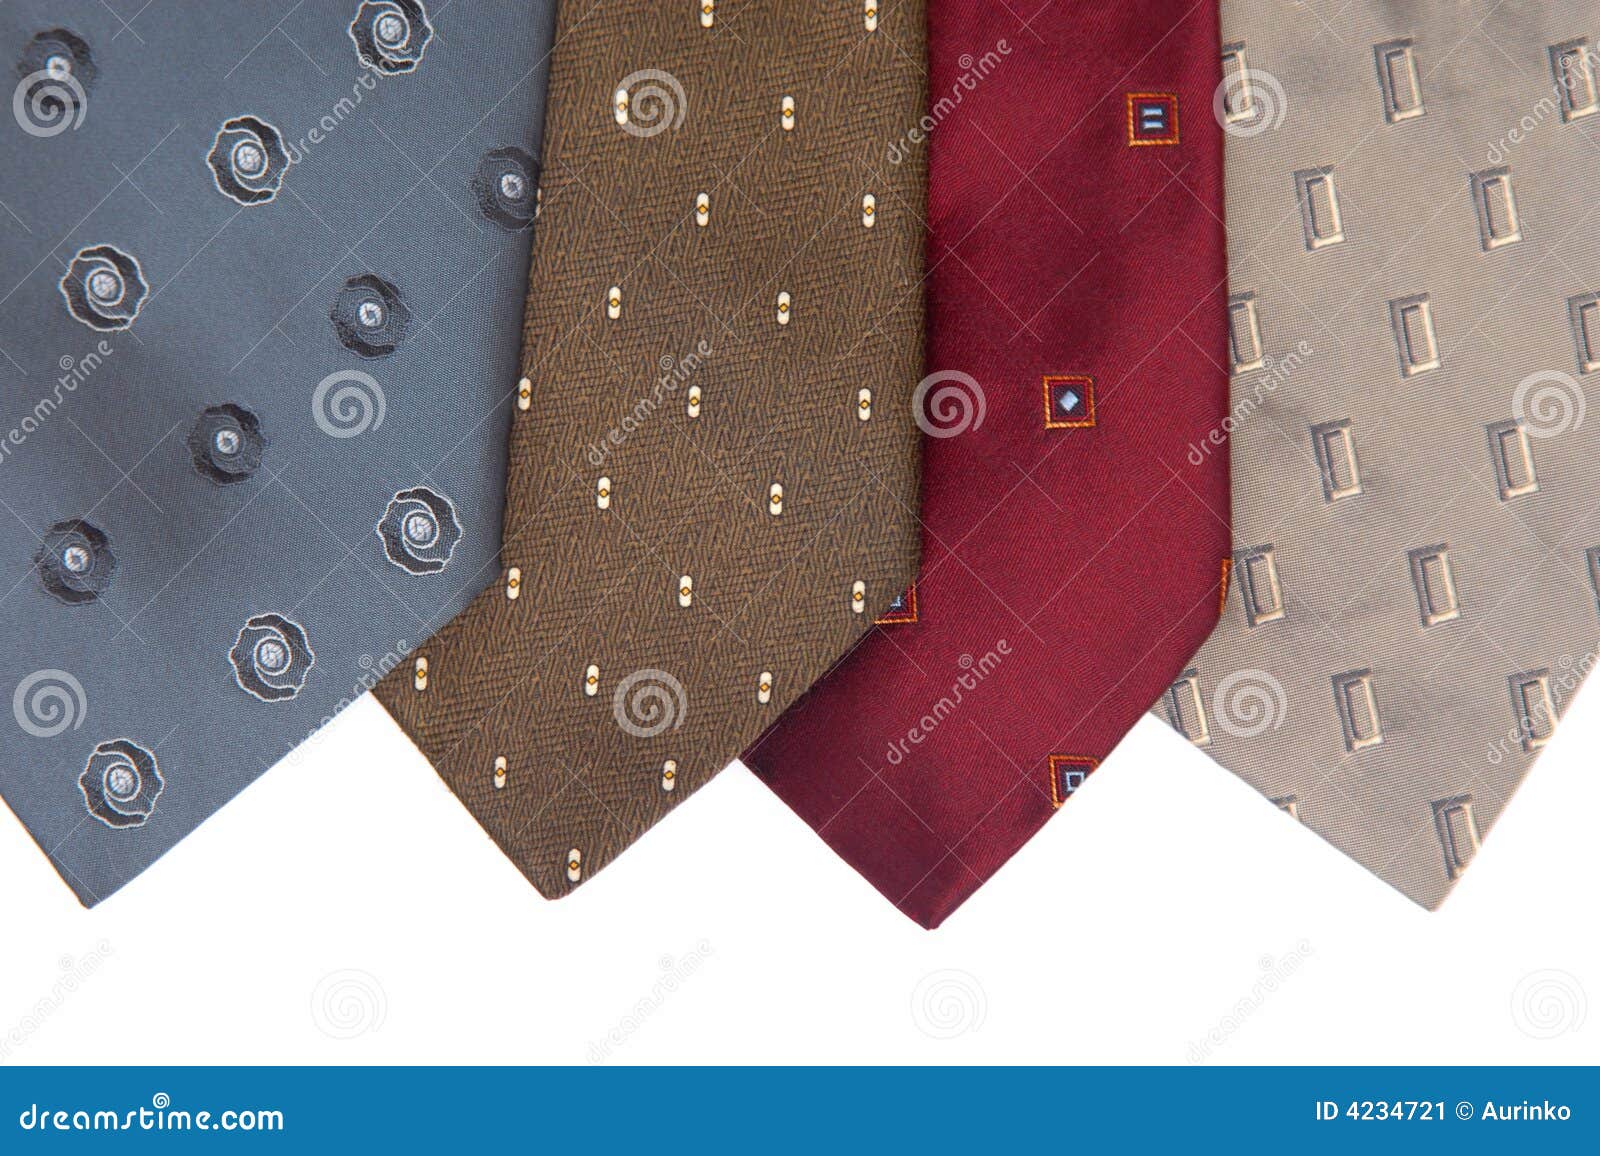 Ties stock image. Image of background, patterns, choice - 4234721